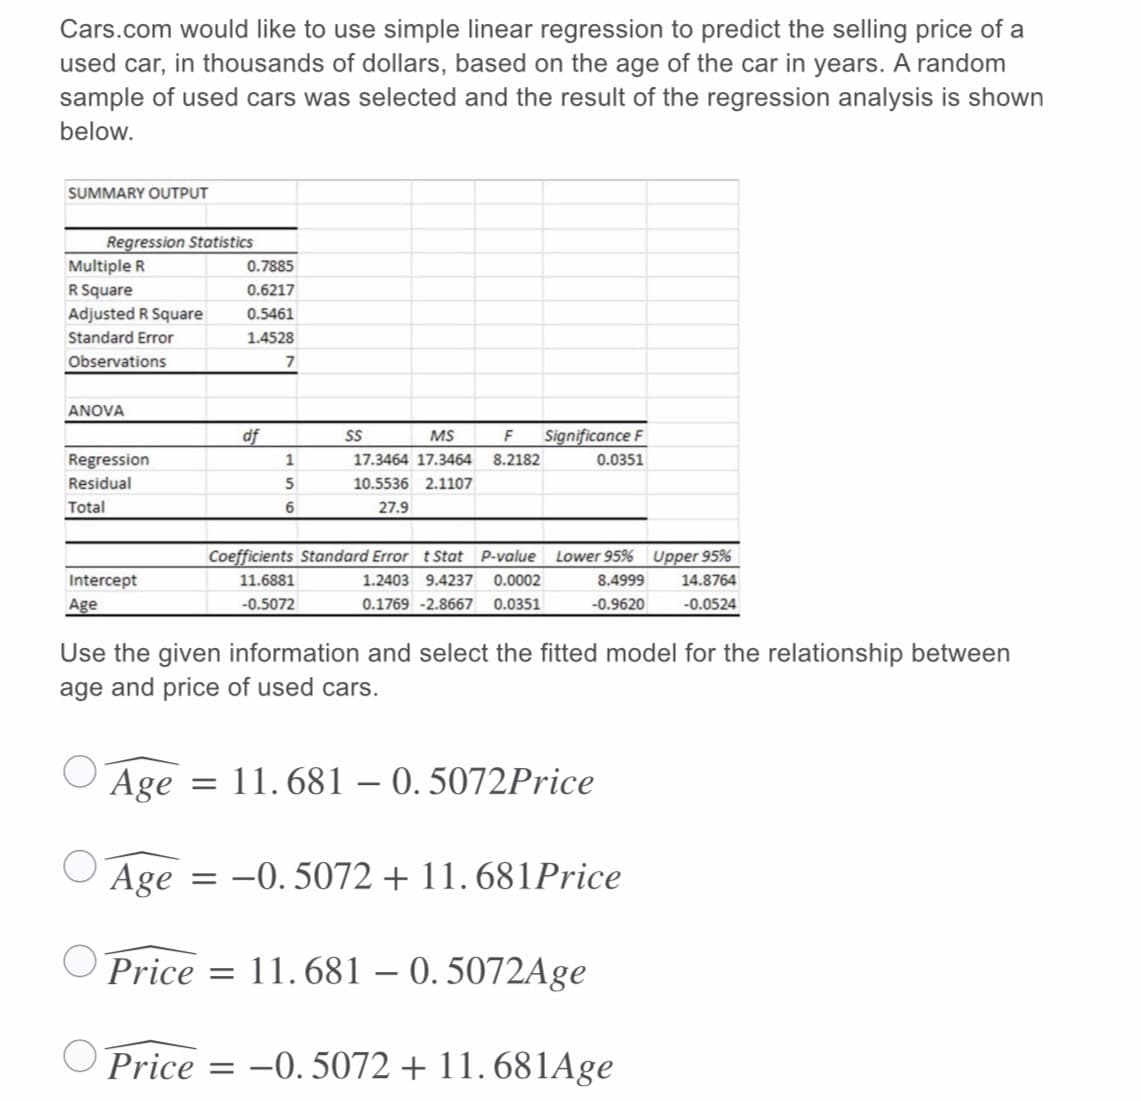 Cars.com would like to use simple linear regression to predict the selling price of a
used car, in thousands of dollars, based on the age of the car in years. A random
sample of used cars was selected and the result of the regression analysis is shown
below.
SUMMARY OUTPUT
Regression Statistics
Multiple R
0.7885
R Square
Adjusted R Square
0.6217
0.5461
Standard Error
1.4528
Observations
ANOVA
df
S
MS
Significance F
Regression
1
17.3464 17.3464
8.2182
0.0351
Residual
5
10.5536 2.1107
Total
6.
27.9
Coefficients Standard Error t Stat P-value Lower 95% Upper 95%
Intercept
11.6881
1.2403 9.4237
0.0002
8.4999
14.8764
Age
-0.5072
0.1769 -2.8667
0.0351
-0.9620
-0.0524
Use the given information and select the fitted model for the relationship between
age and price of used cars.
